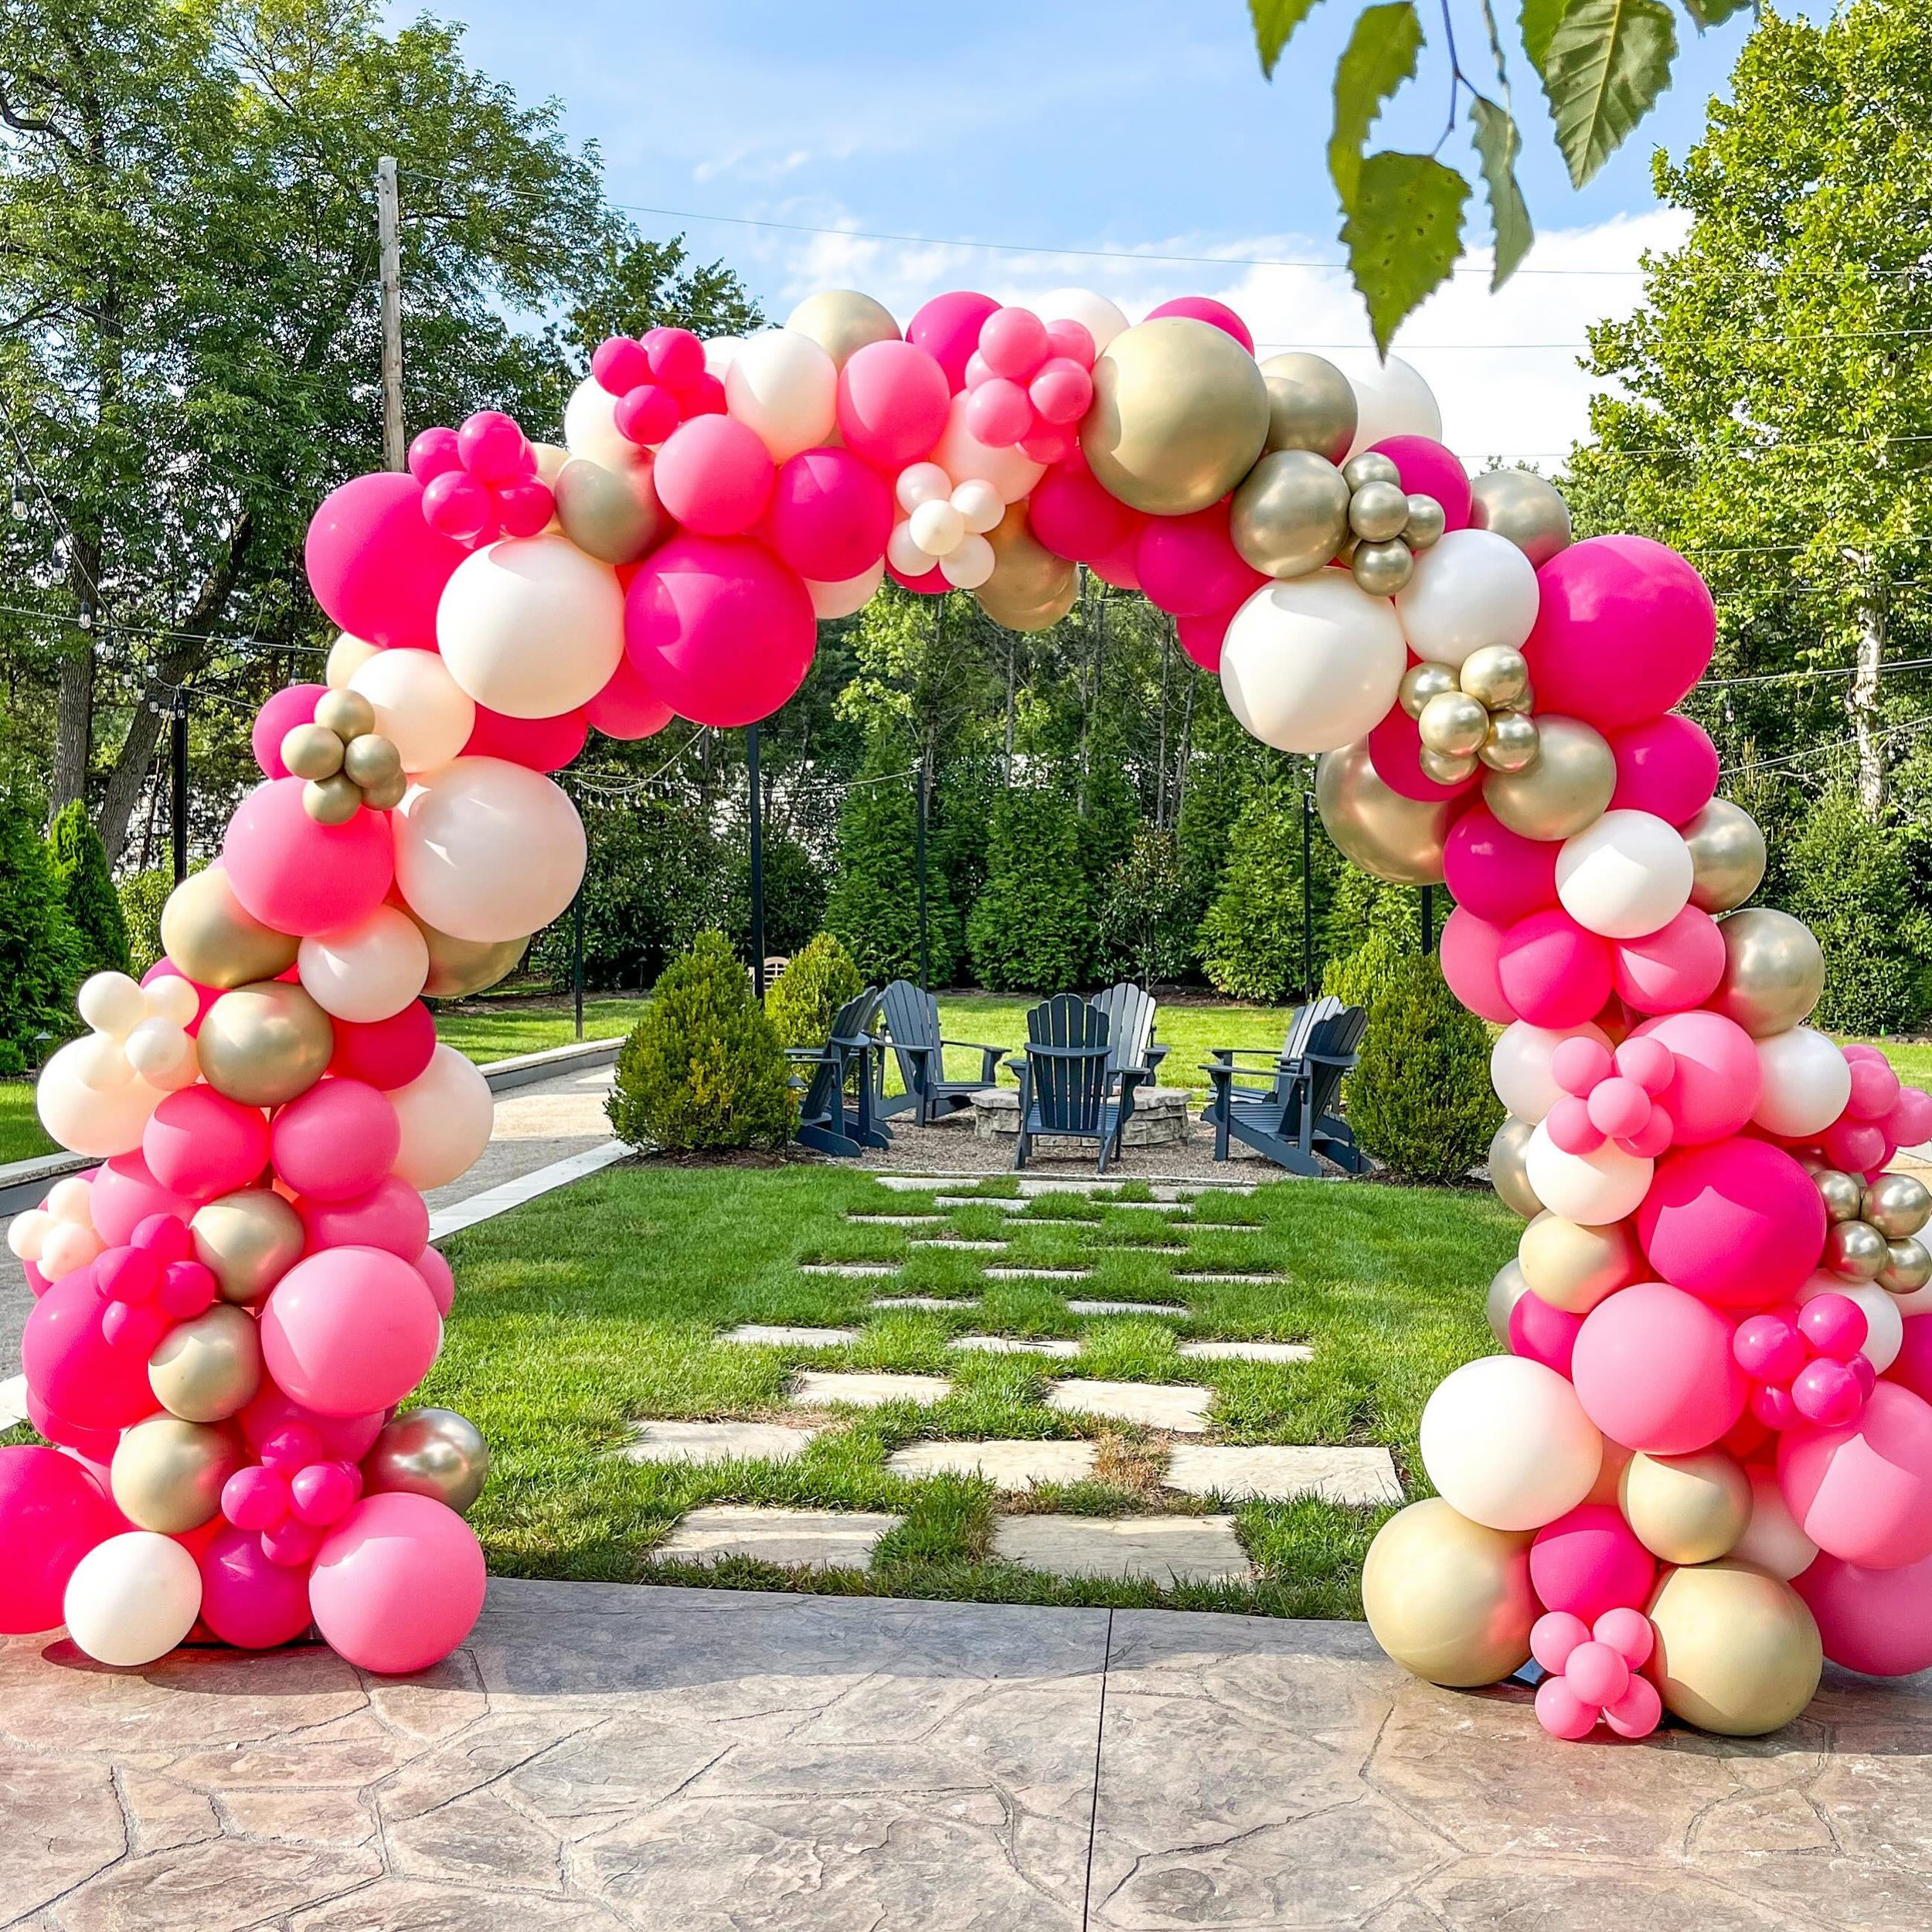 Pretty in pink💖🎀🌸

This is perfect for all the pink lovers!!

What&rsquo;s your favorite balloon color?!😍
-
-
-
#balloondecor #balloondecorations #Stl #StLouisParties #StLouisEvents #partydecor #partyplanning #balloongarland #balloondecorations #